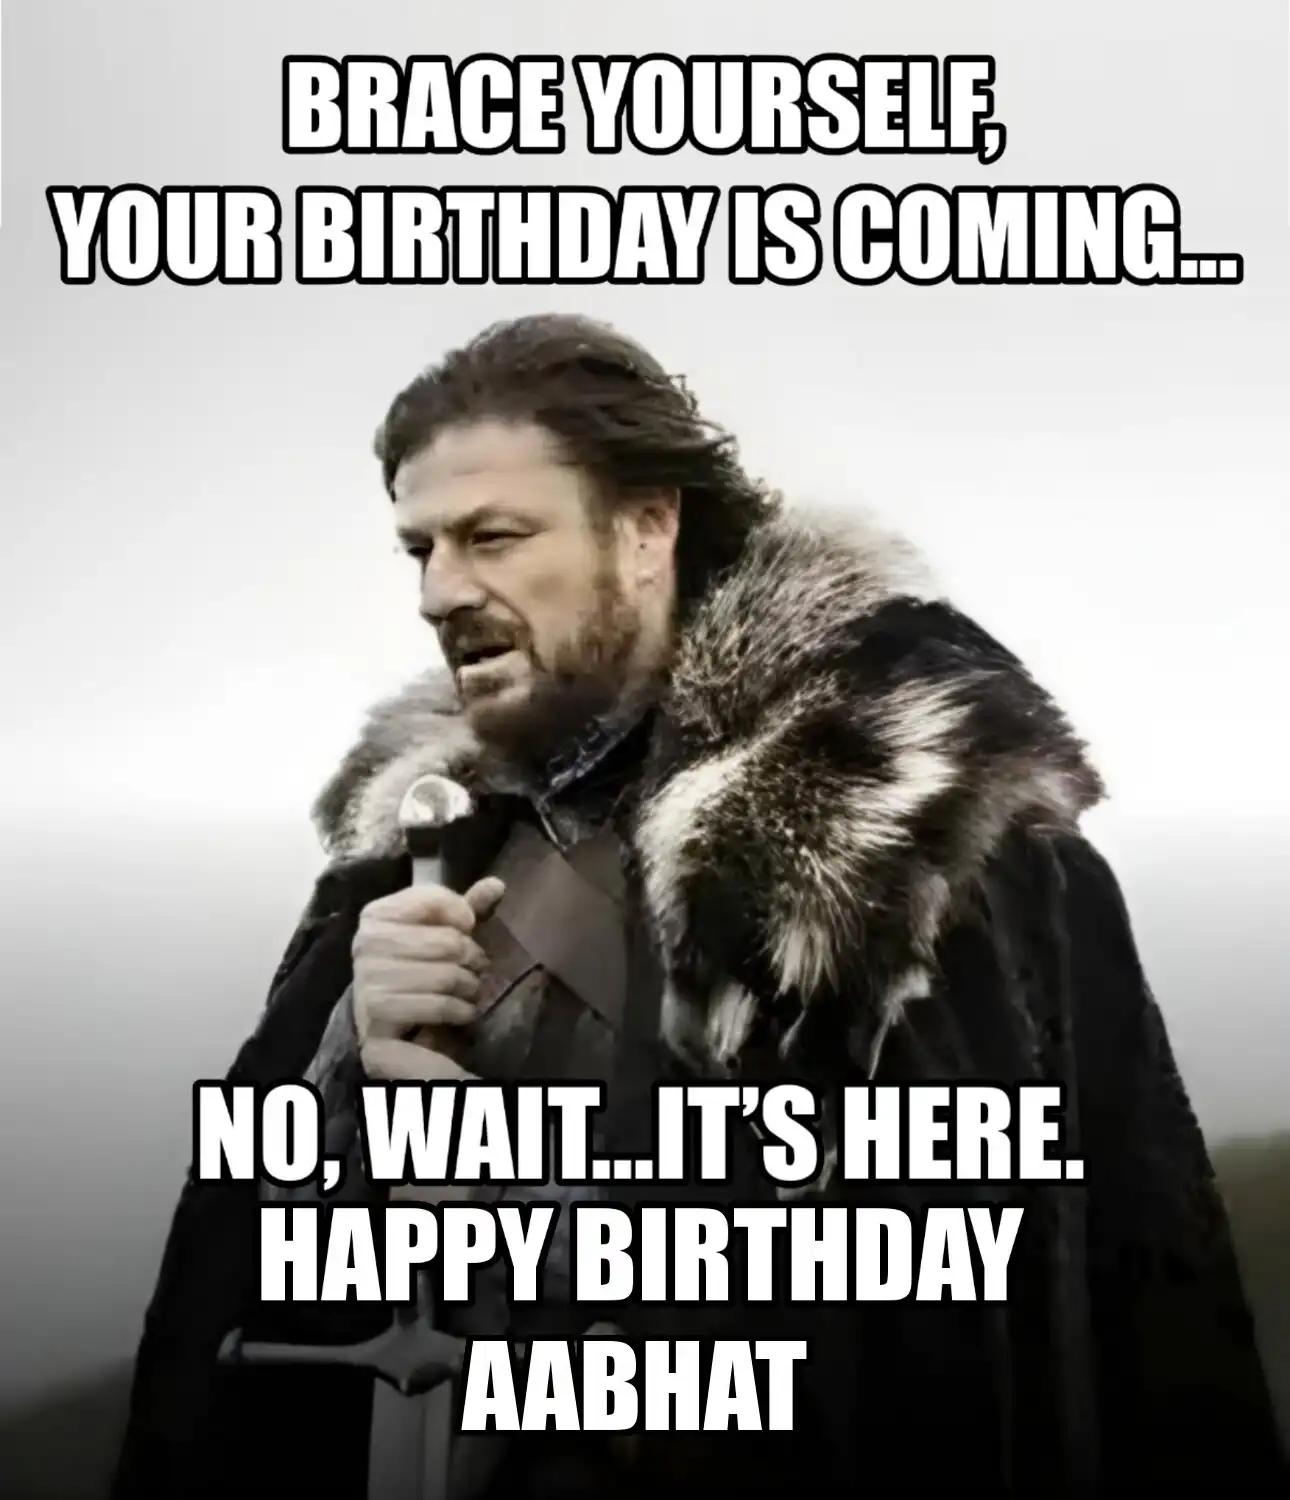 Happy Birthday Aabhat Brace Yourself Your Birthday Is Coming Meme